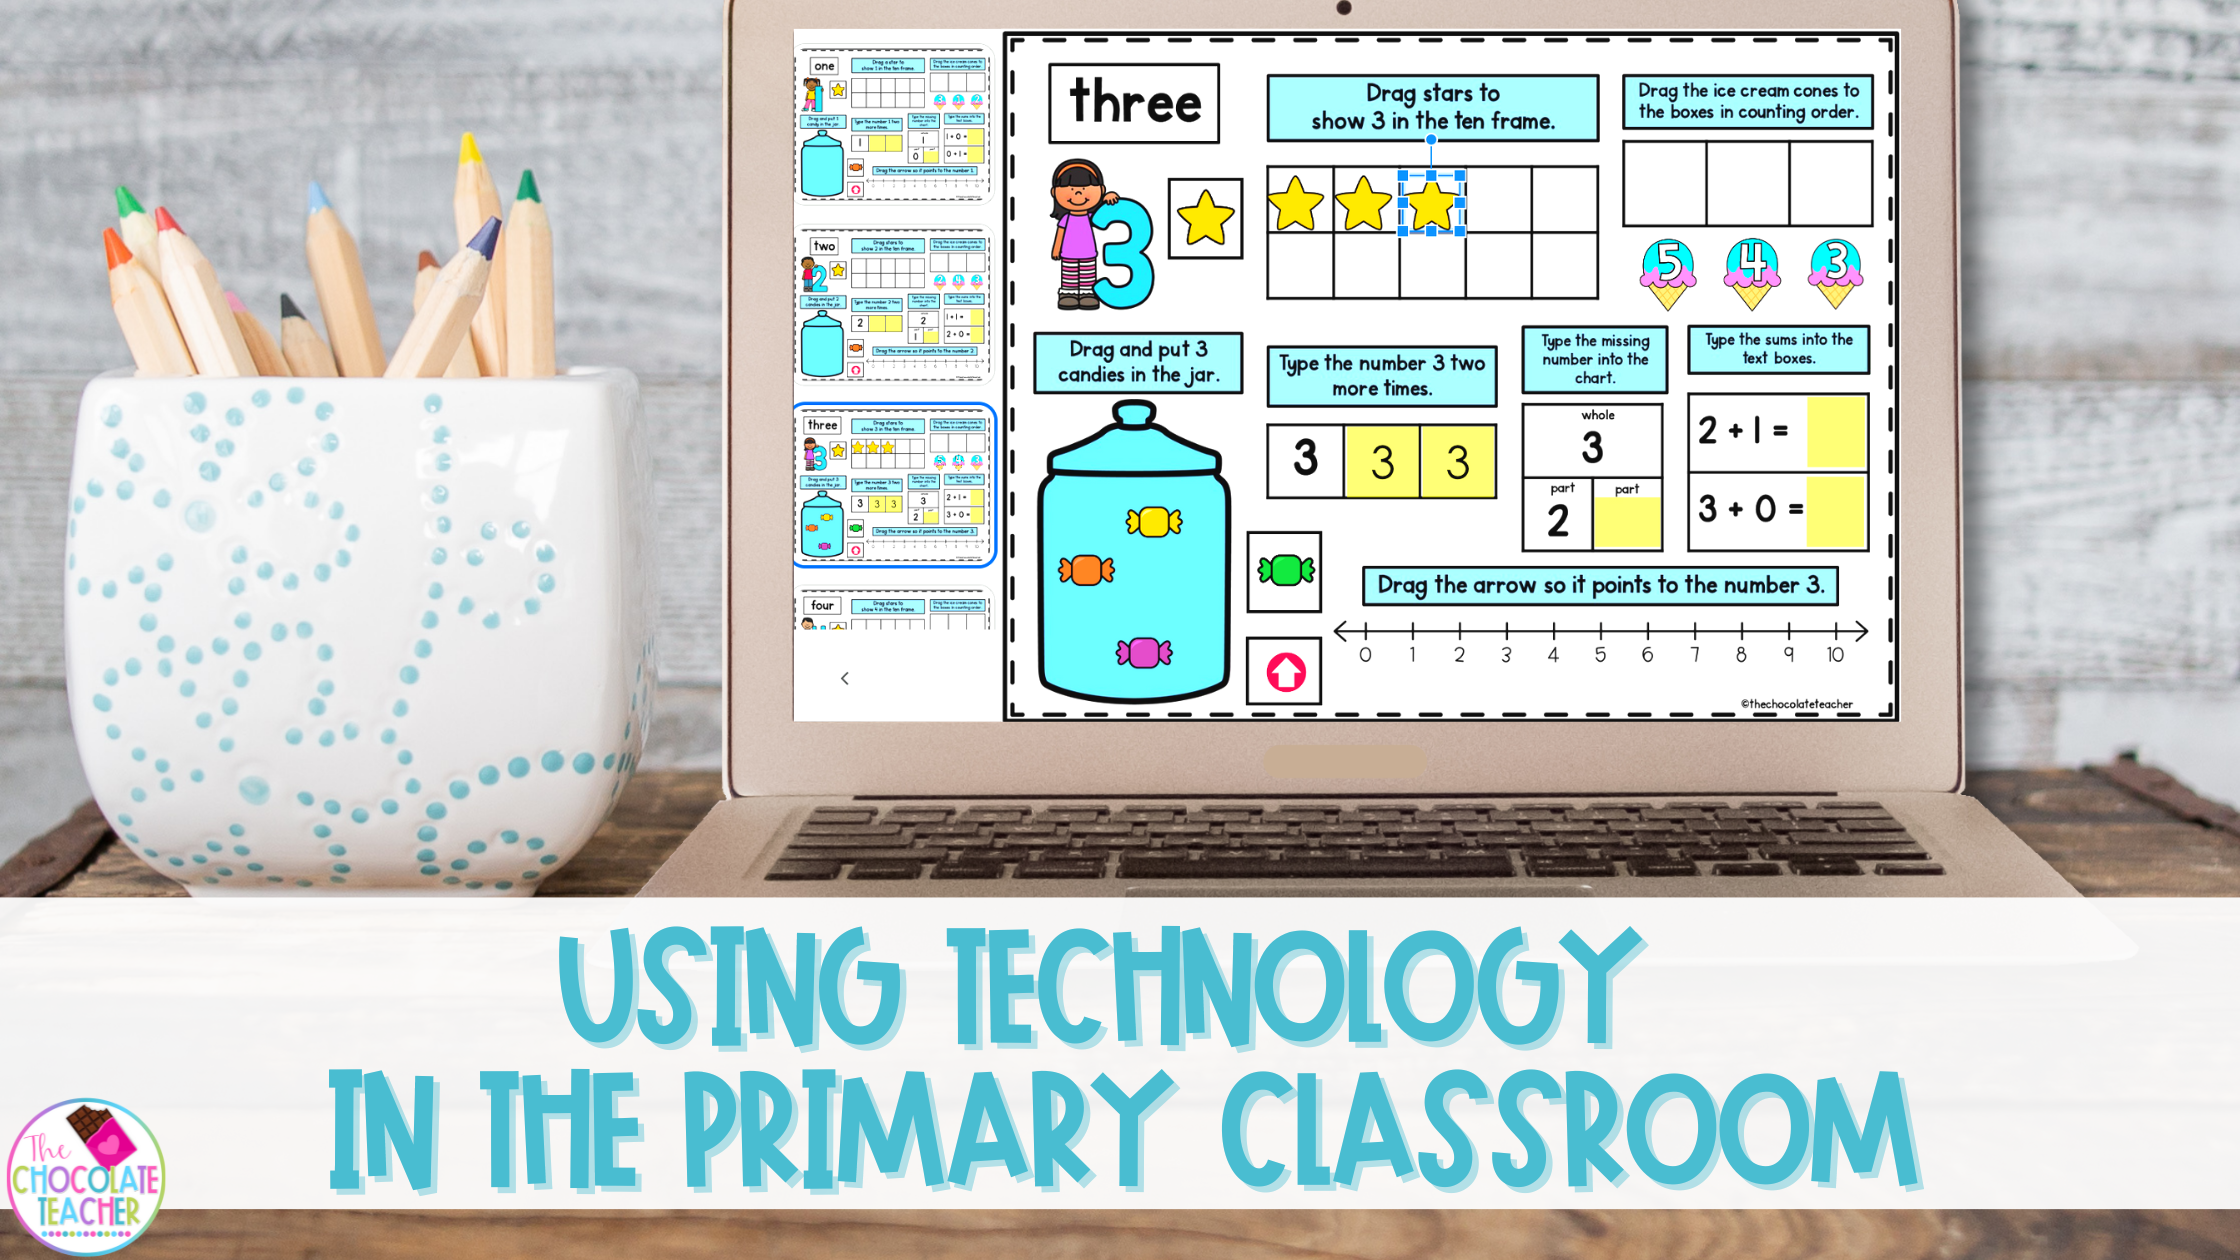 Using technology in the primary classroom can open up opportunities for your students to practice ELA and math skills in fun and engaging ways your students will love.